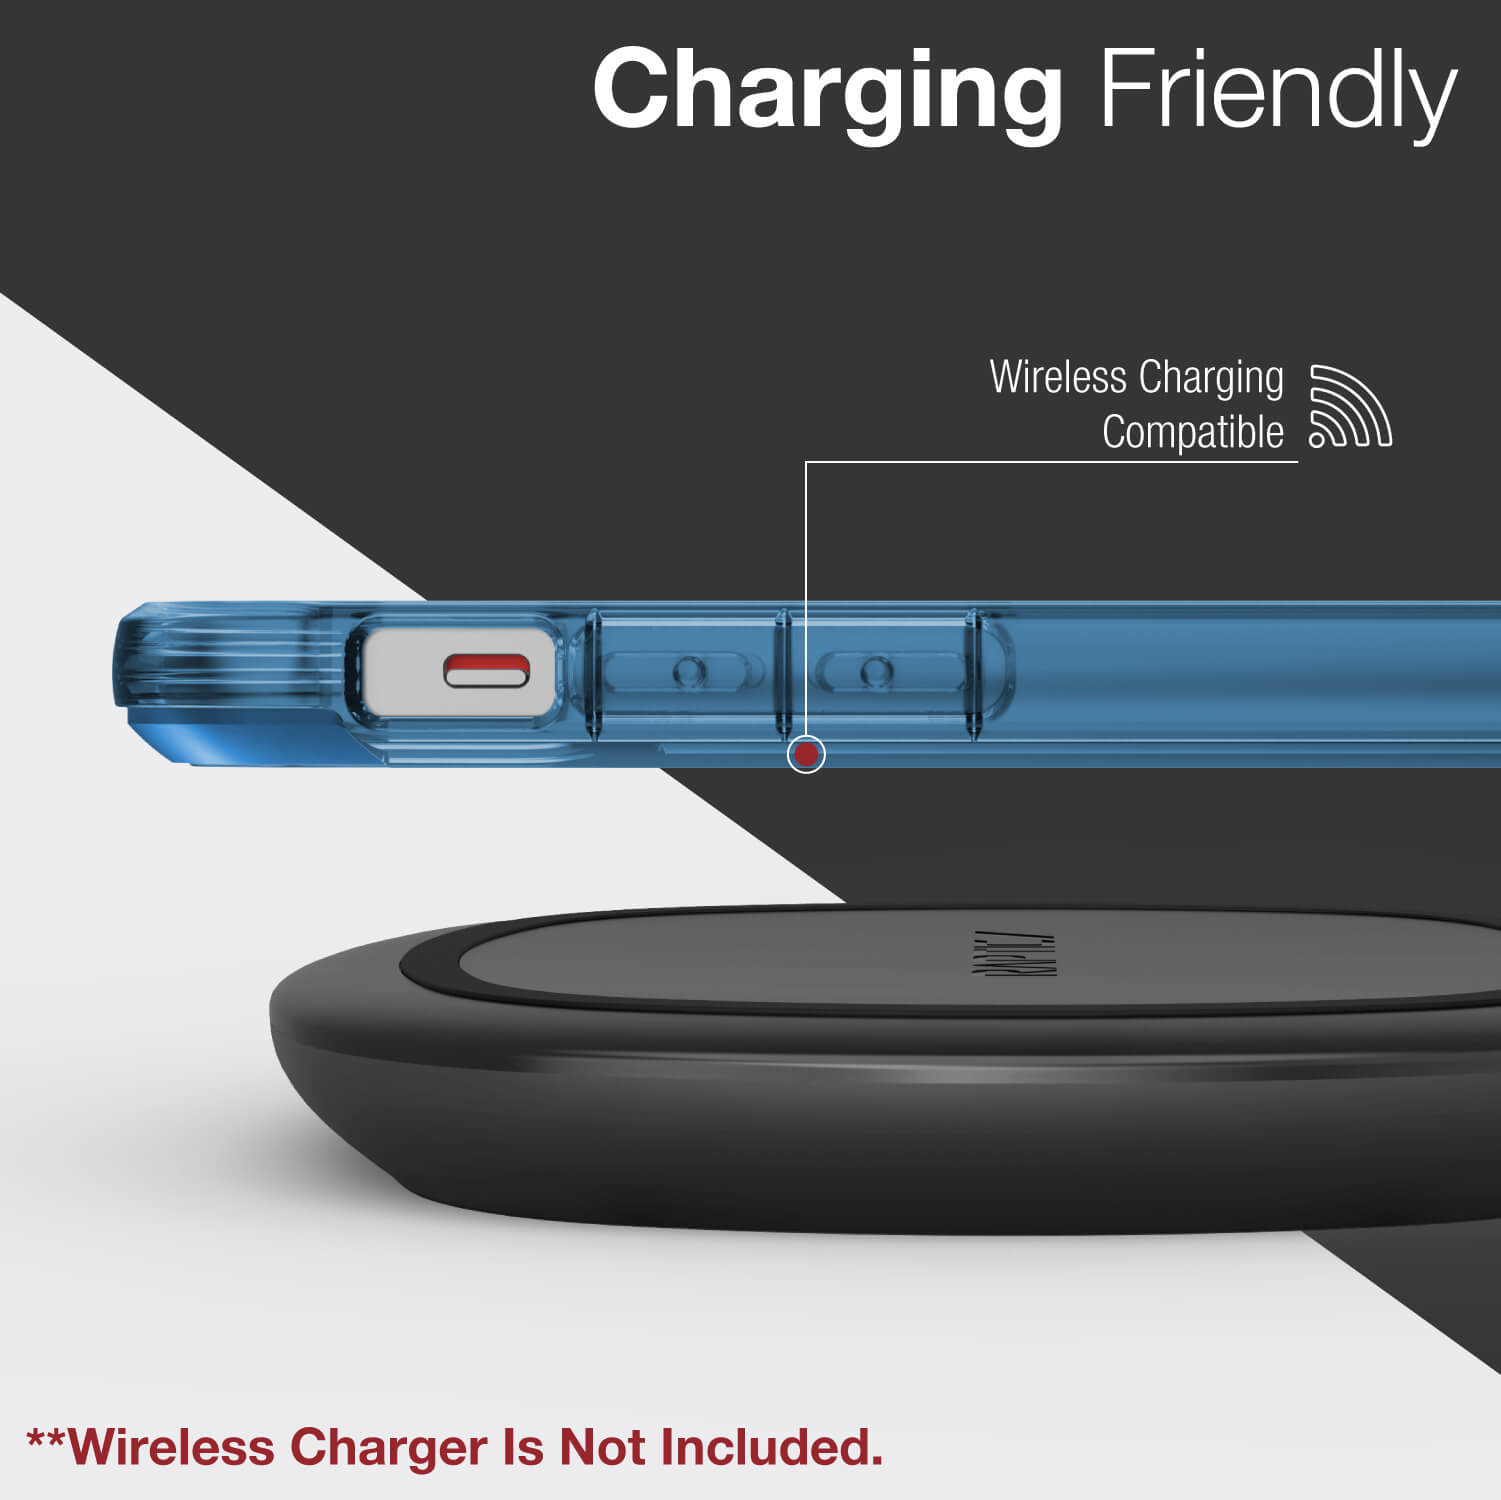 An infographic showing an iPhone 12 Pro wireless charging while encased in a Raptic Air case